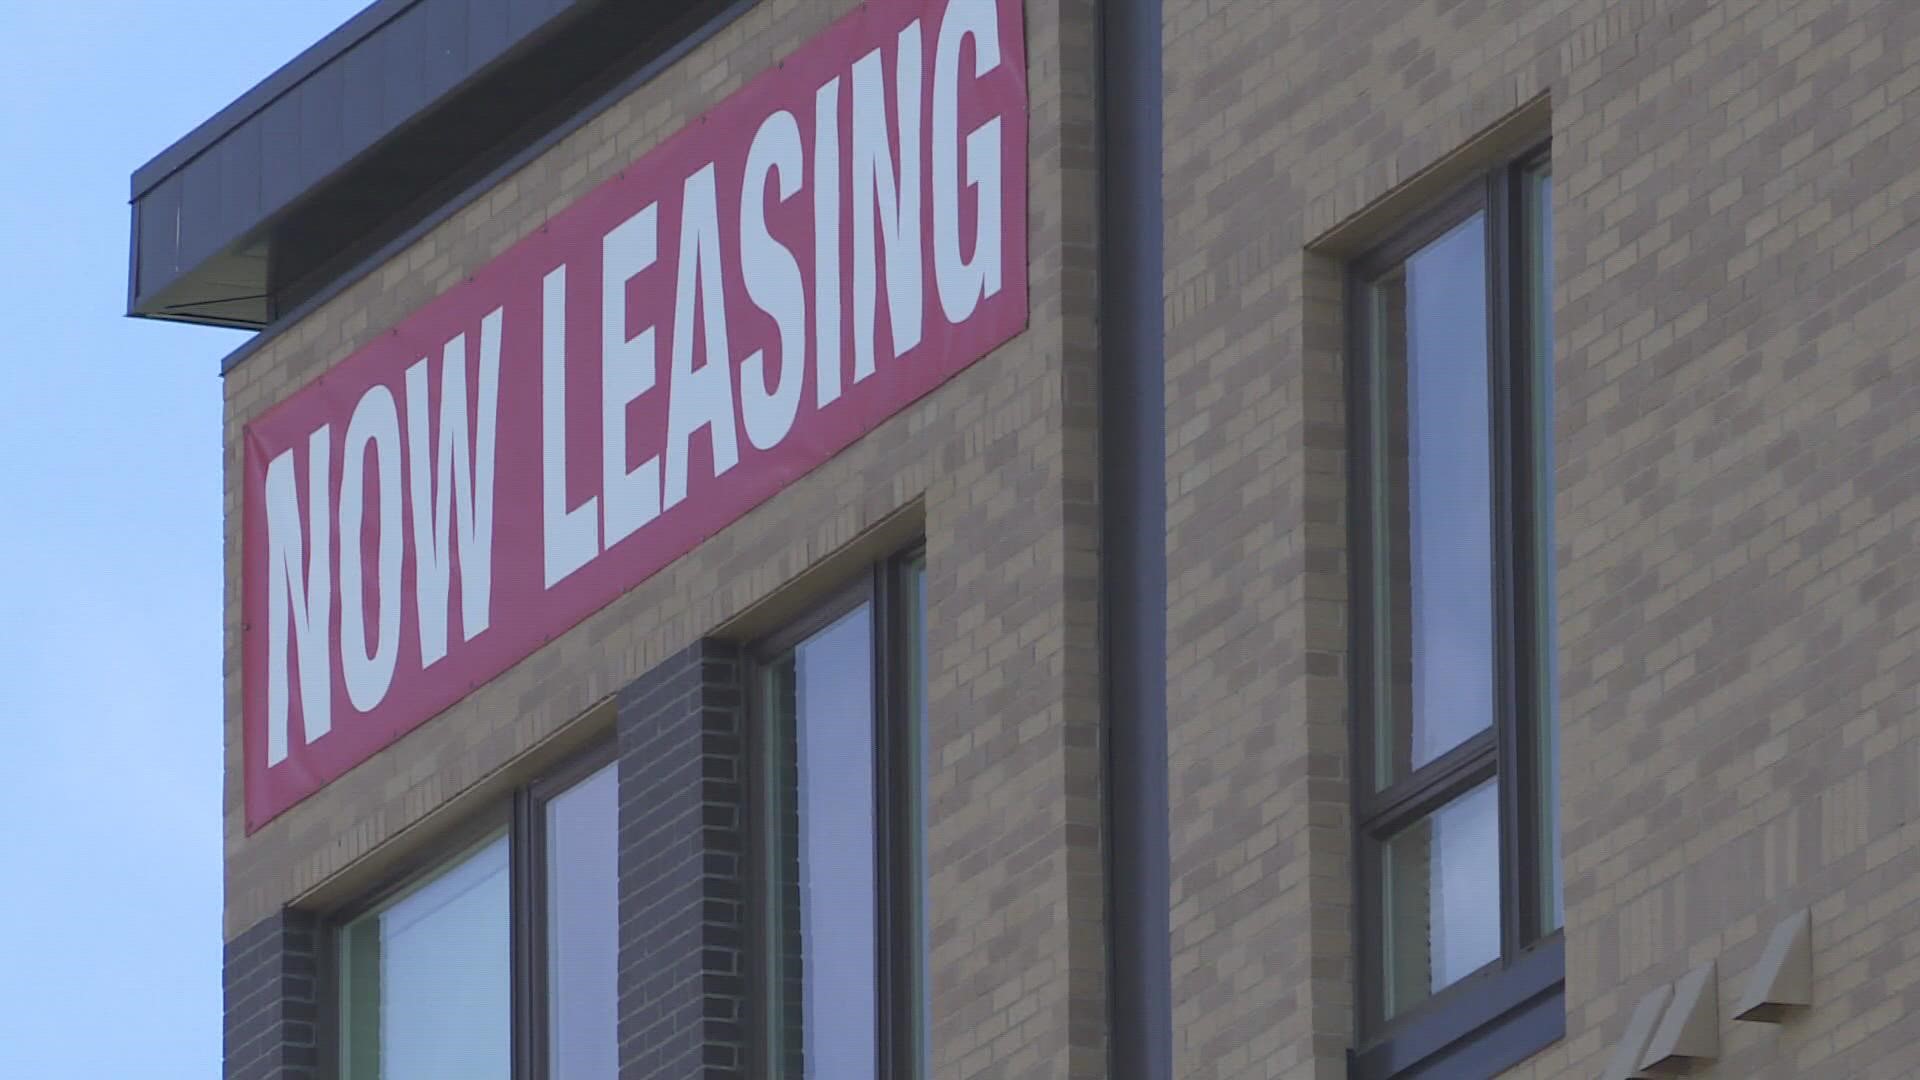 Rising prices and interest rates have sent many would-be home buyers back to renew their apartment lease. Real estate expert Lane Lyon has tips for renters.